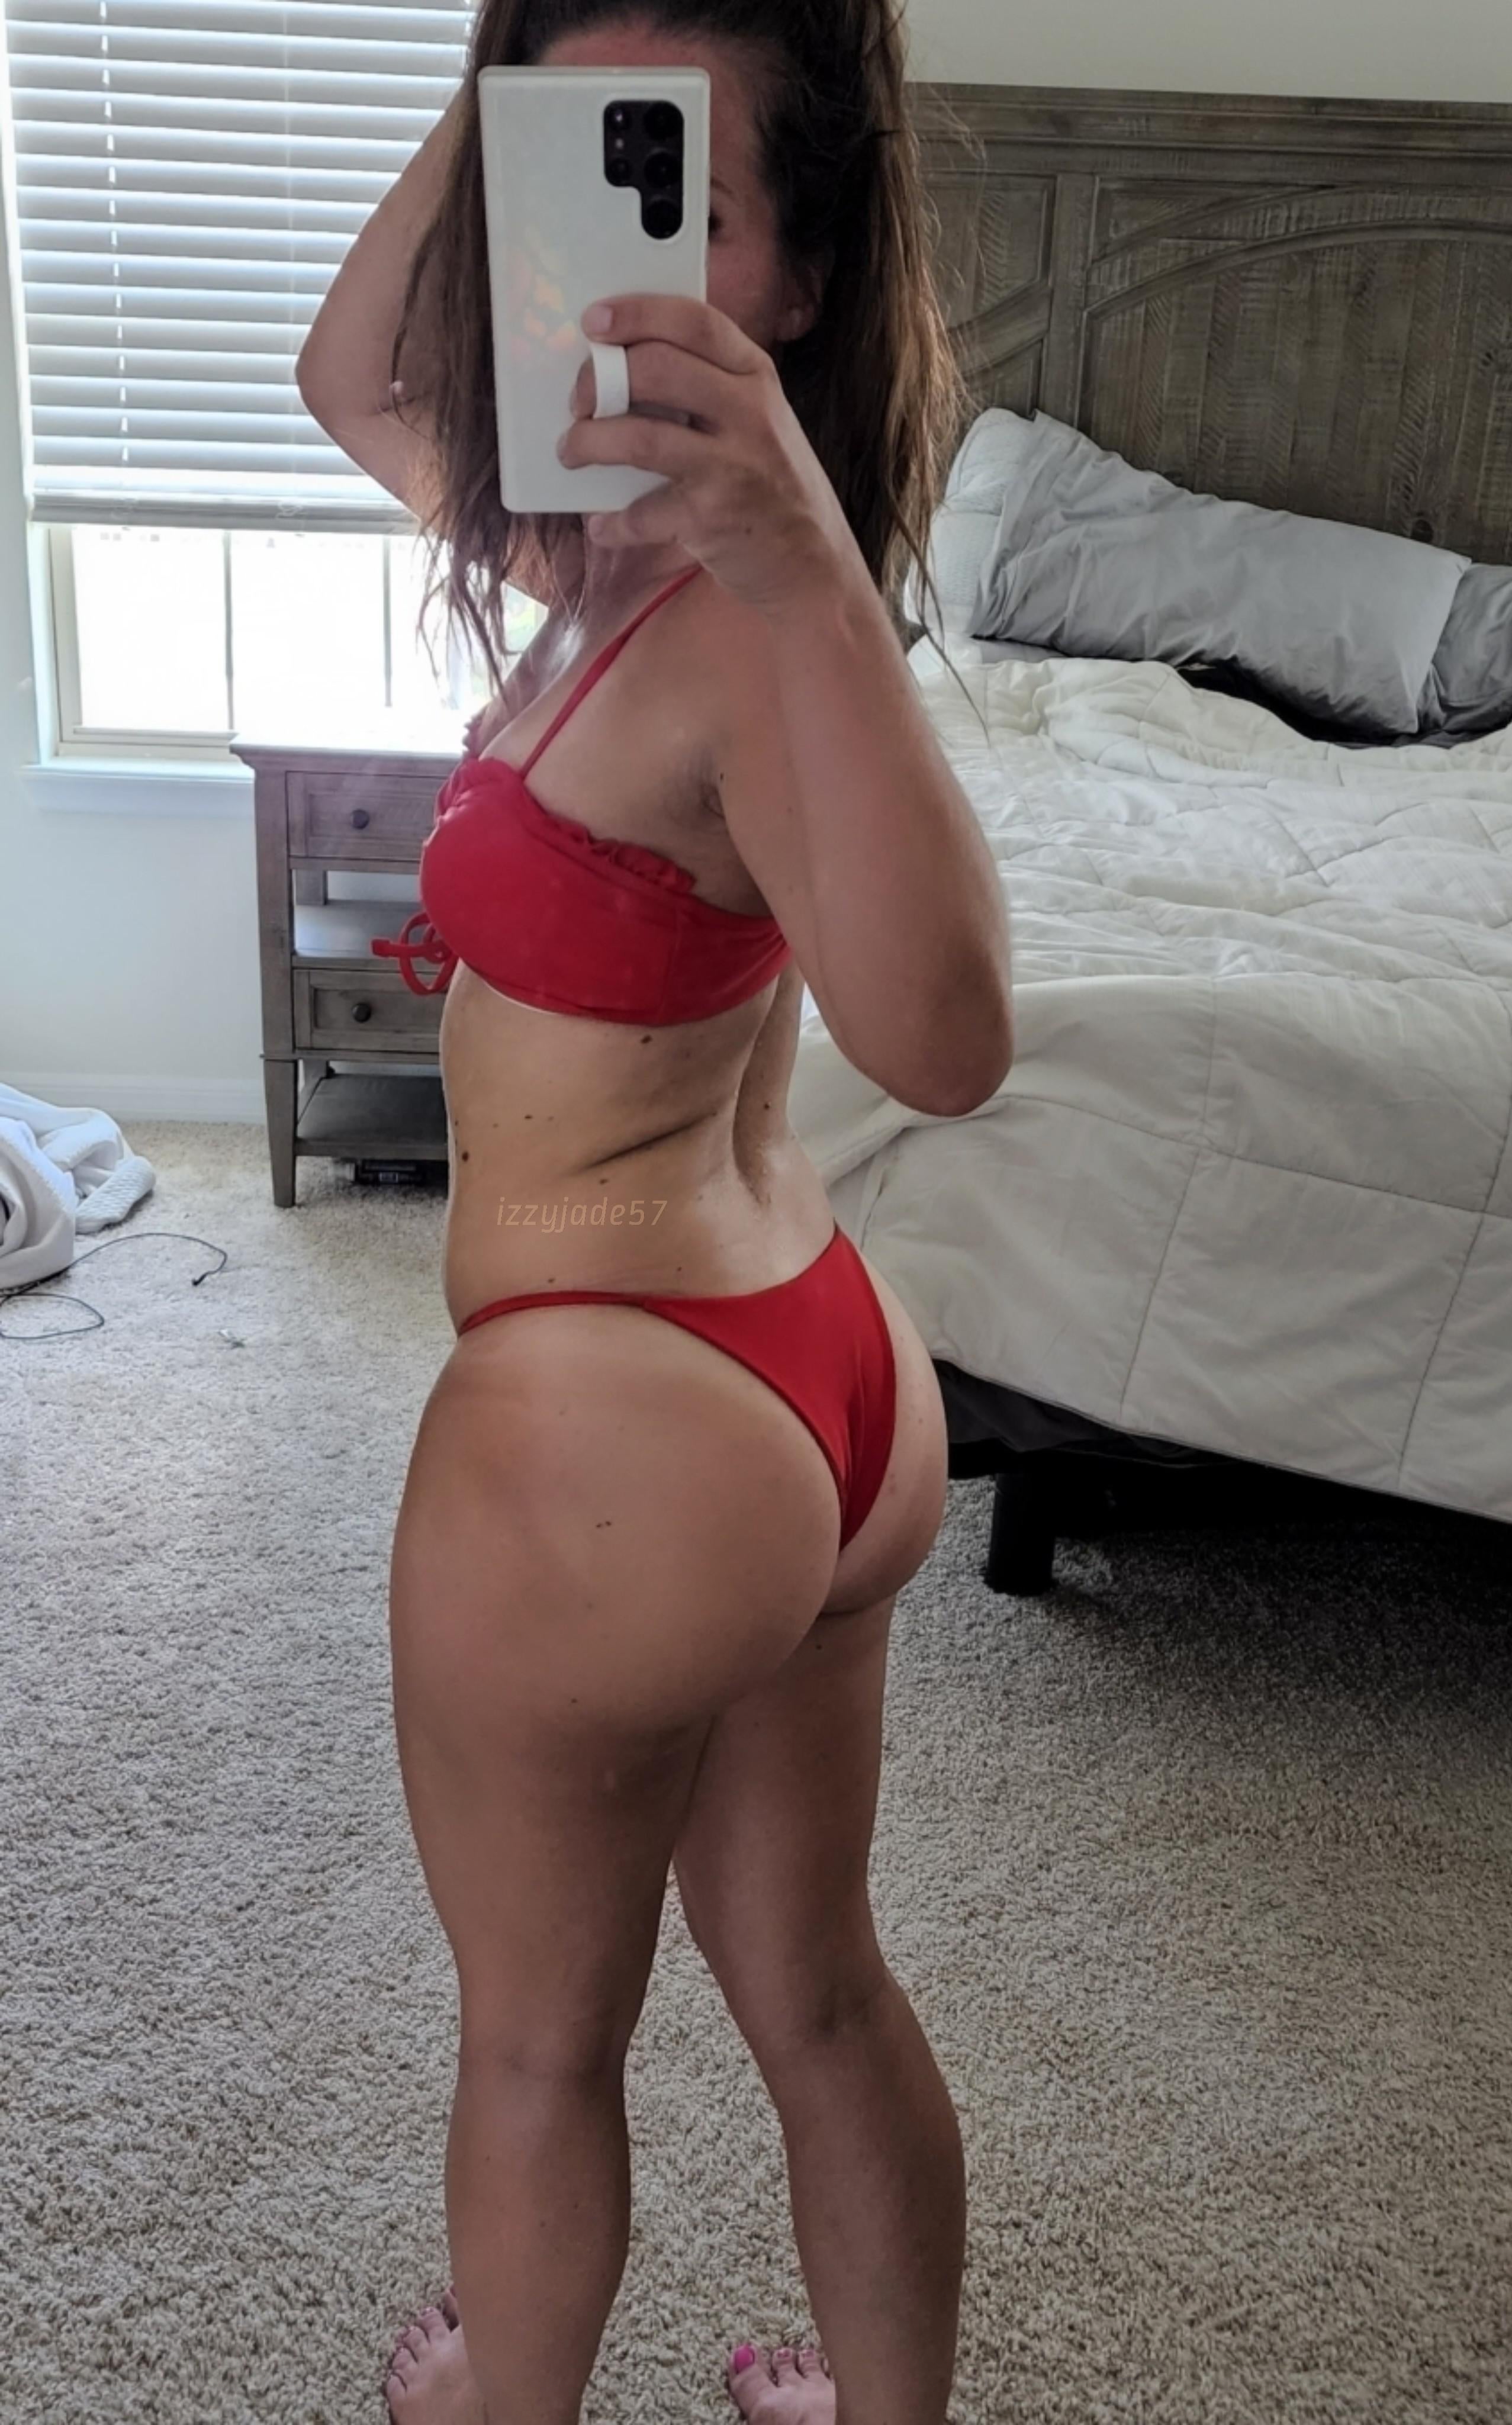 PAWG just a mom of 2 flaunting my little bubble